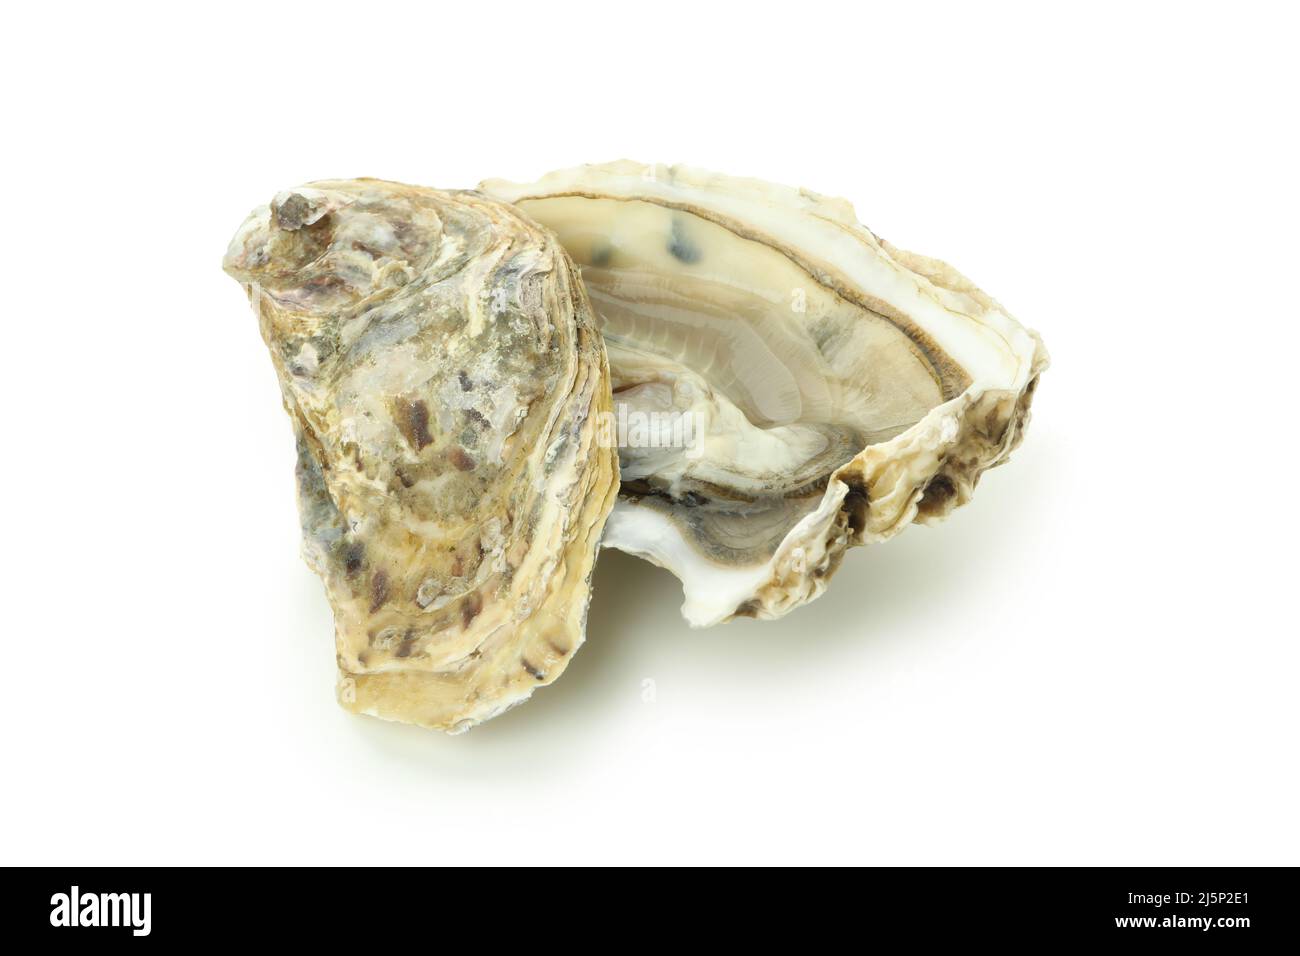 Concept of delicious seafood, oyster isolated on white background Stock Photo